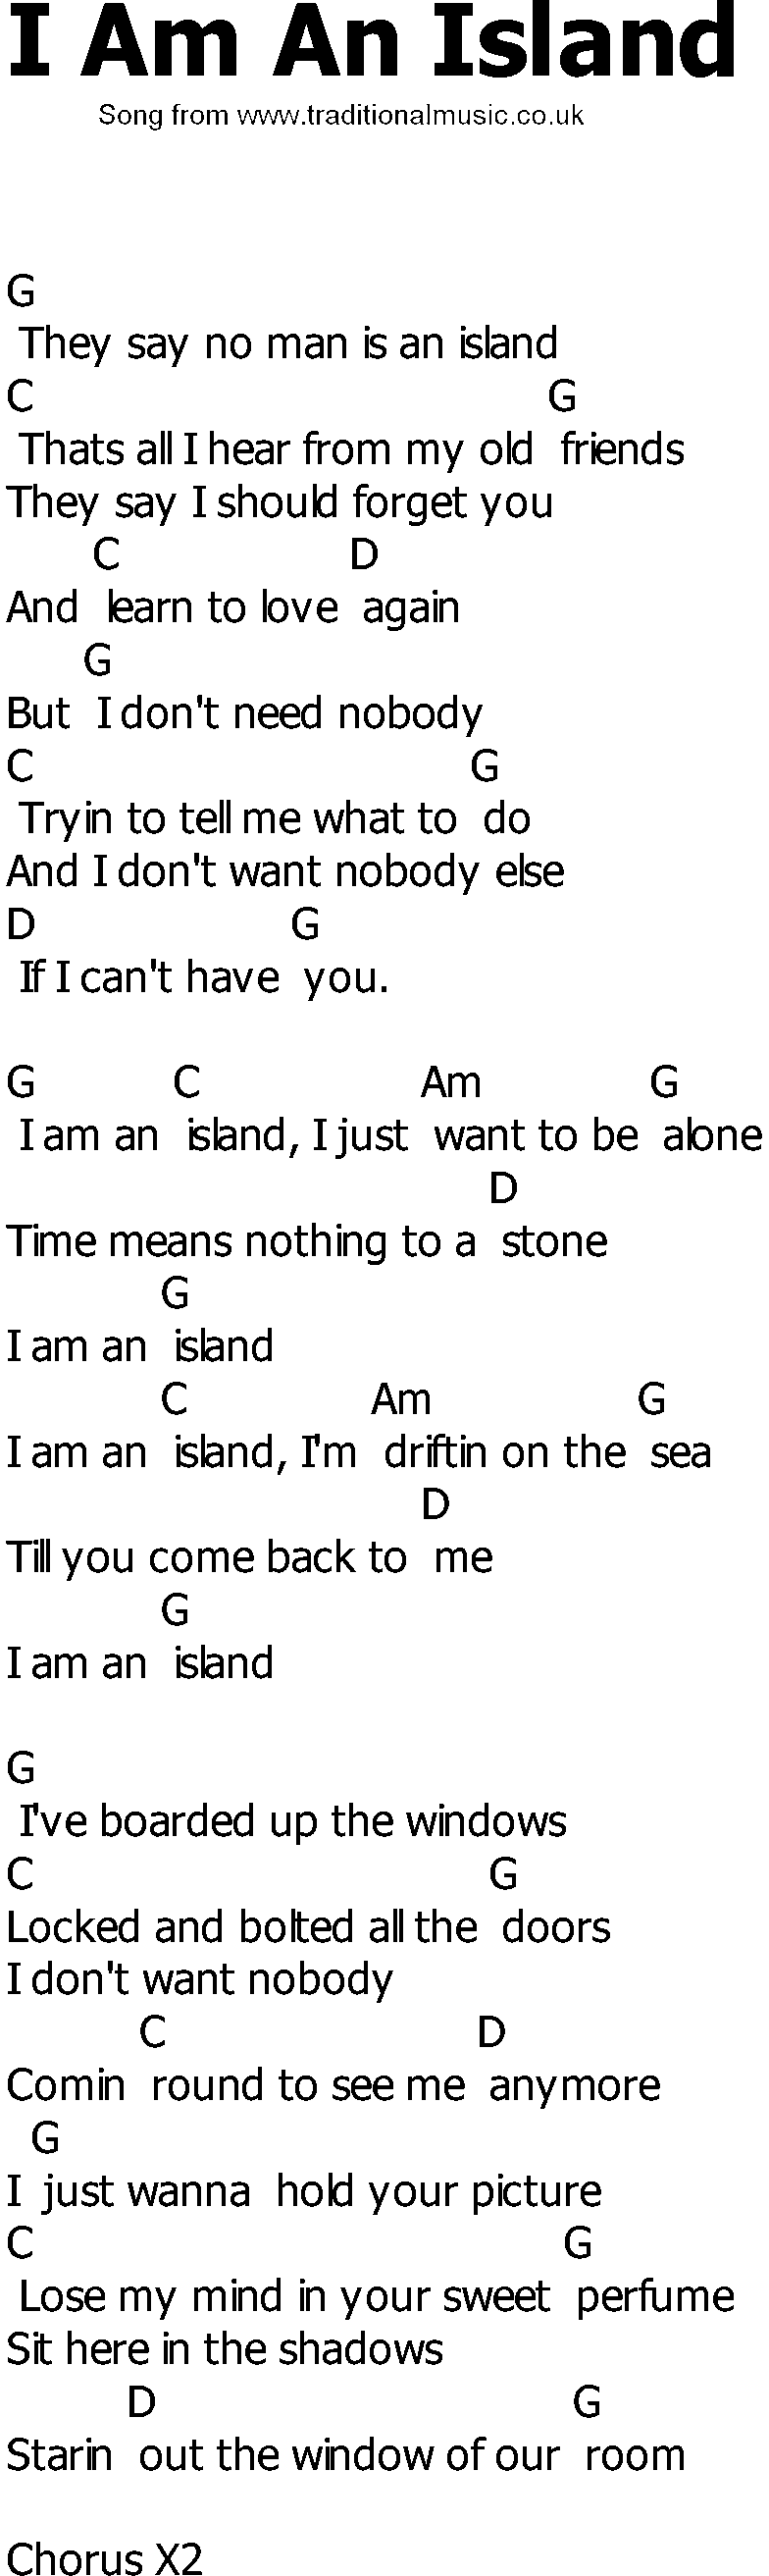 Old Country song lyrics with chords - I Am An Island